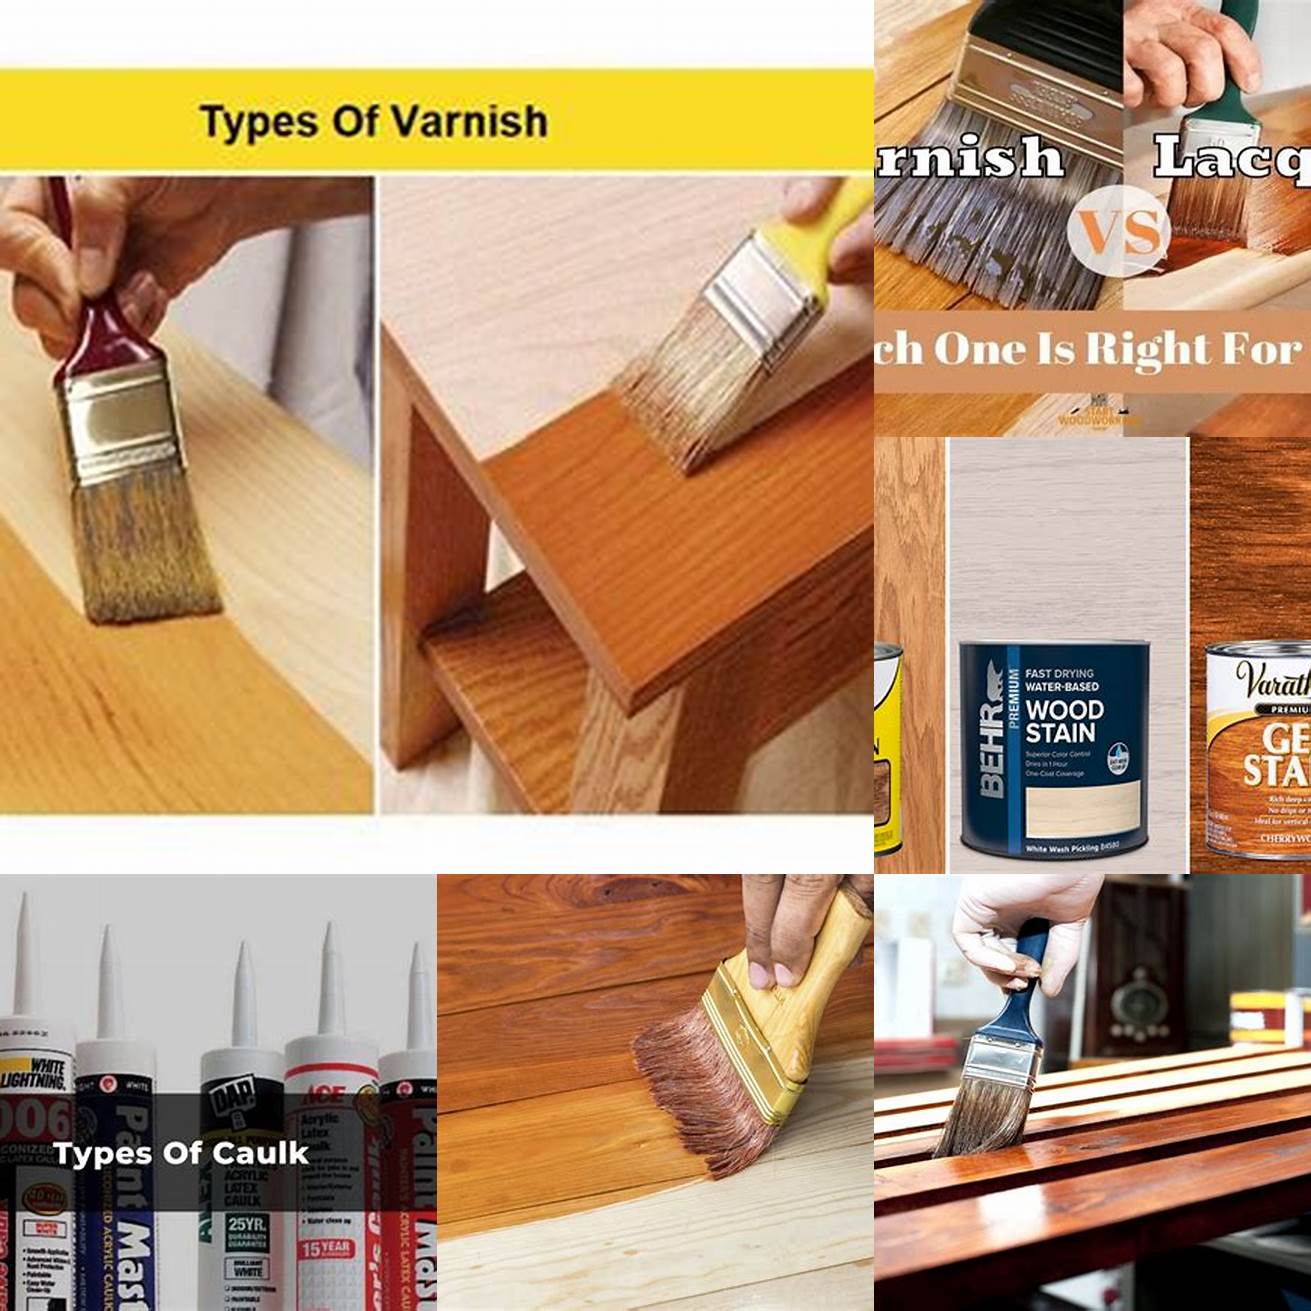 Comparing different types of sealants and varnishes